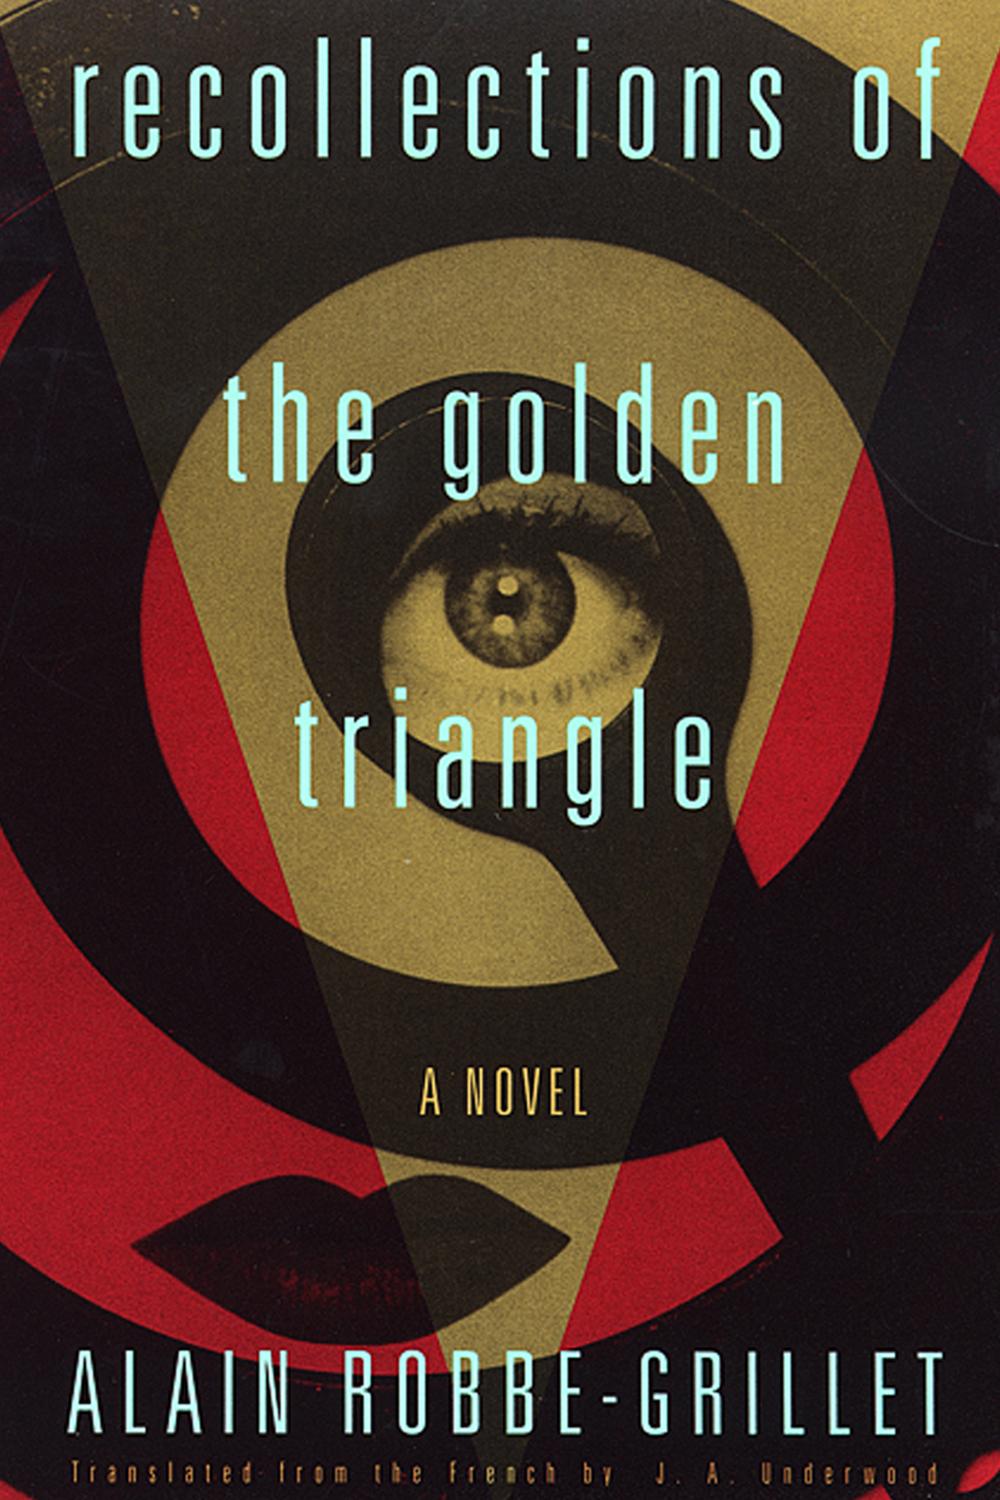 Recollections of the Golden Triangle - Alain Robbe-Grillet, J.A. Underwood